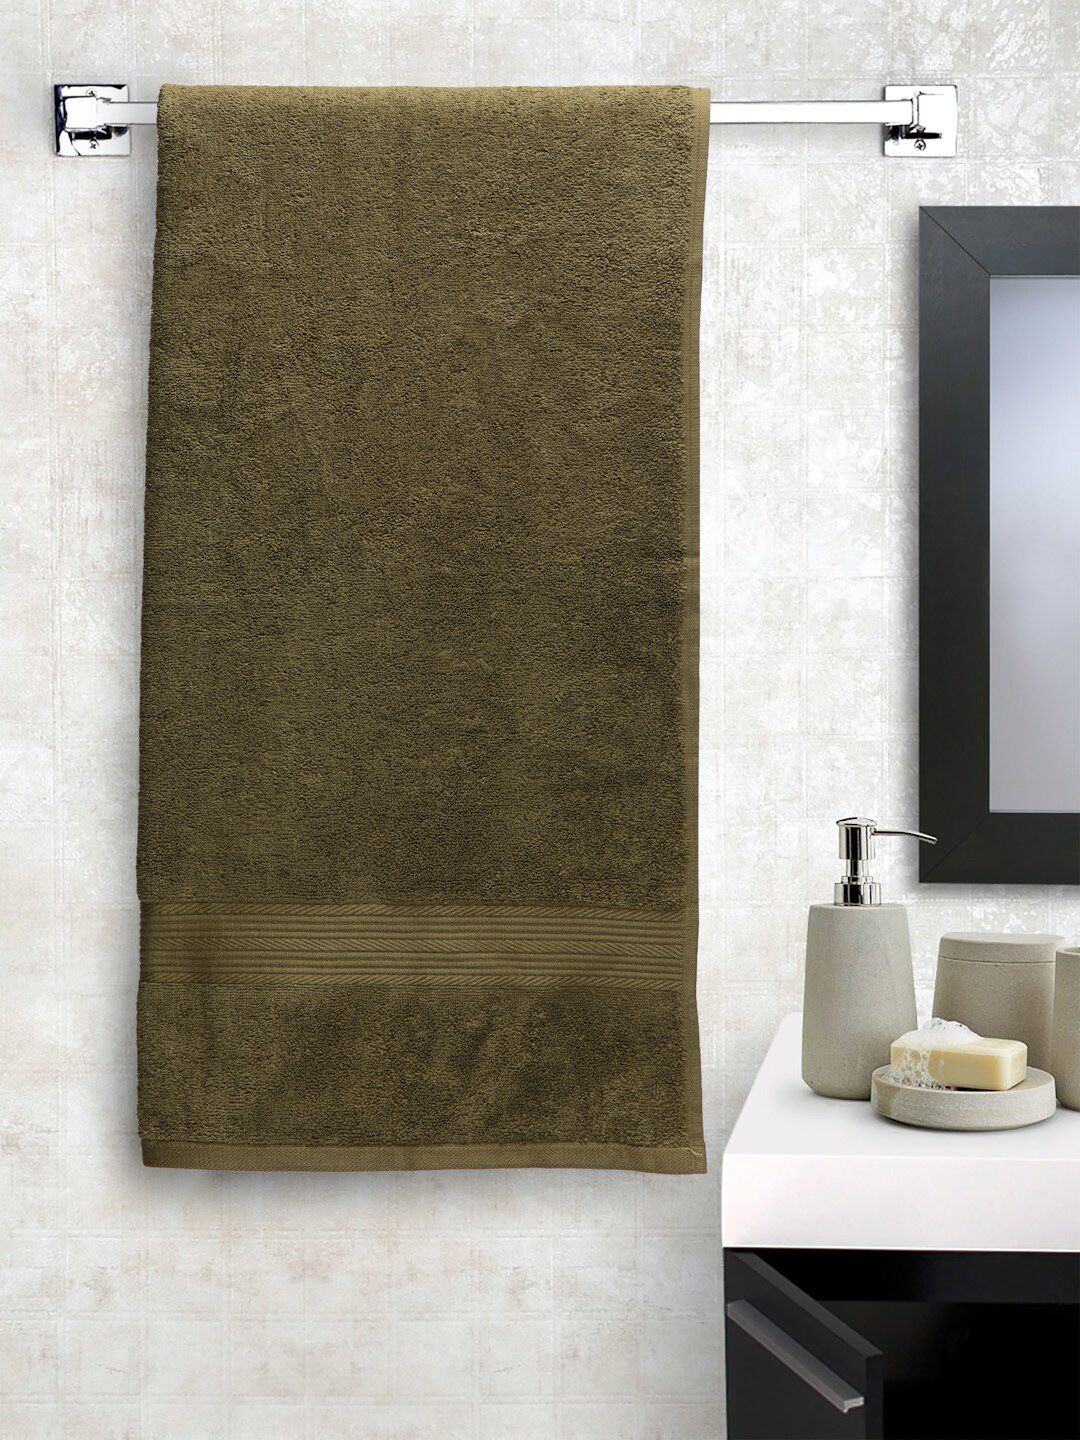 Creeva Olive Green Solid 500 GSM Cotton Bath Towel Price in India